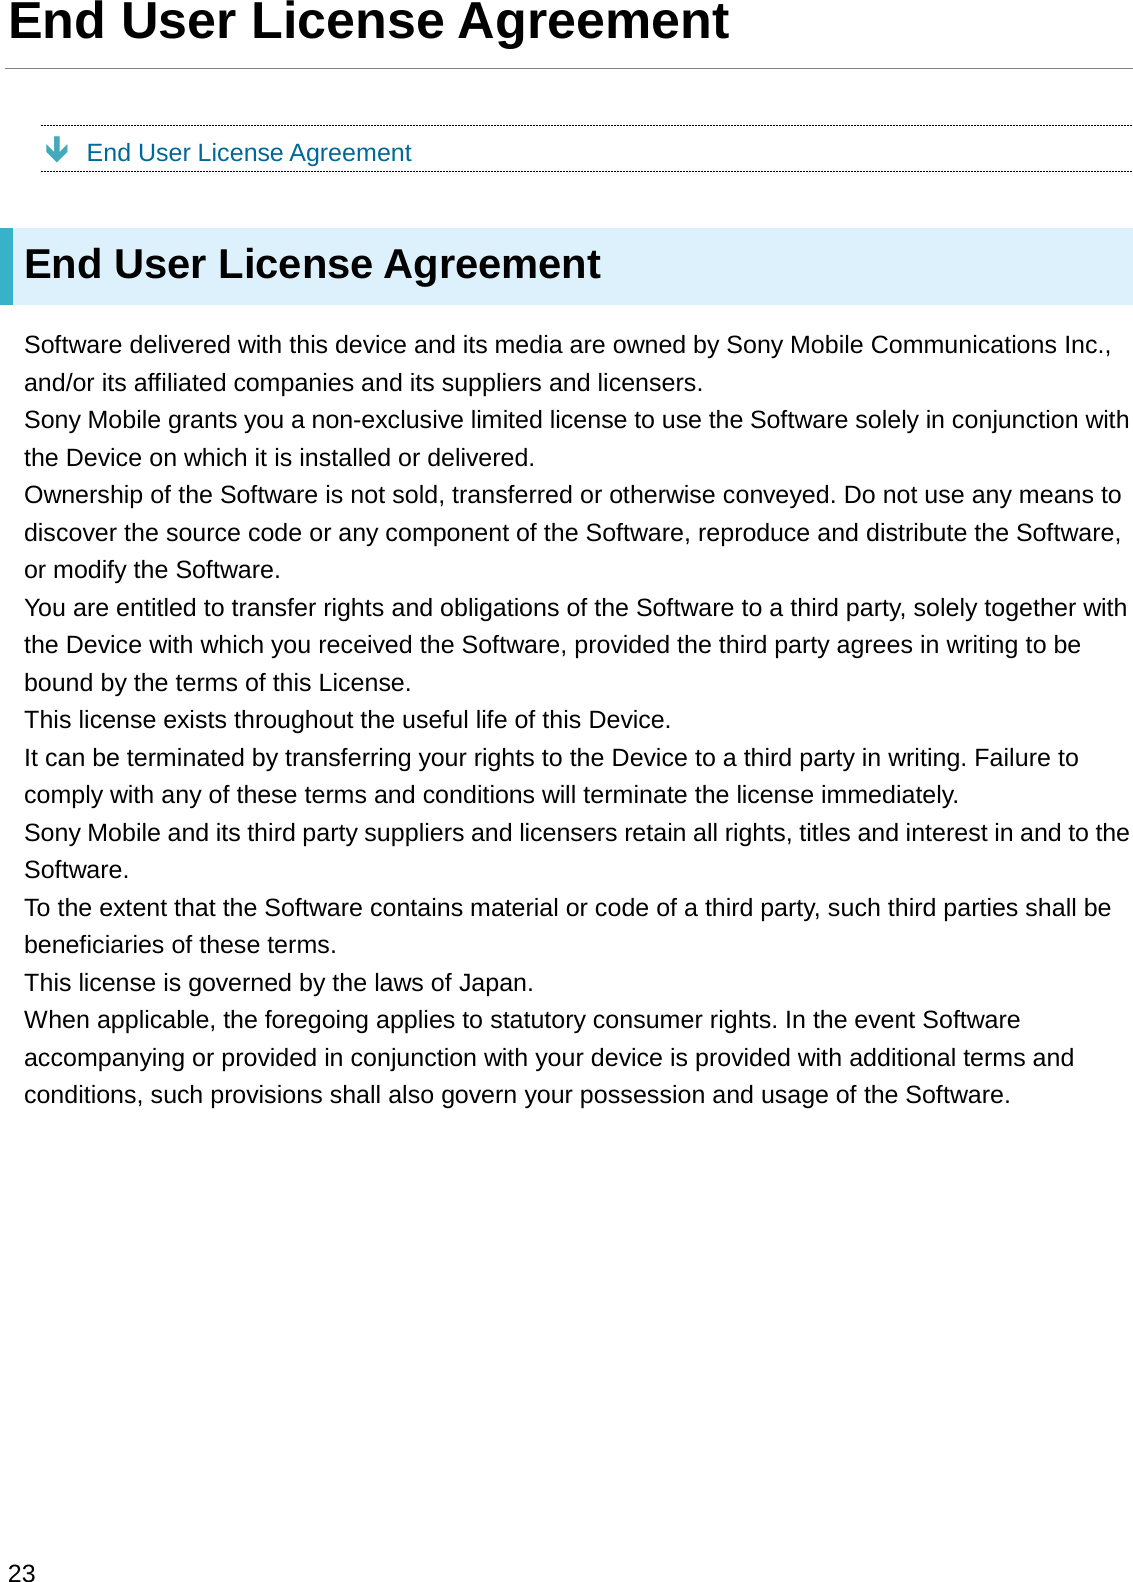 End User License AgreementÐEnd User License AgreementEnd User License AgreementSoftware delivered with this device and its media are owned by Sony Mobile Communications Inc., and/or its affiliated companies and its suppliers and licensers.Sony Mobile grants you a non-exclusive limited license to use the Software solely in conjunction with the Device on which it is installed or delivered.Ownership of the Software is not sold, transferred or otherwise conveyed. Do not use any means to discover the source code or any component of the Software, reproduce and distribute the Software, or modify the Software.You are entitled to transfer rights and obligations of the Software to a third party, solely together with the Device with which you received the Software, provided the third party agrees in writing to be bound by the terms of this License.This license exists throughout the useful life of this Device.It can be terminated by transferring your rights to the Device to a third party in writing. Failure to comply with any of these terms and conditions will terminate the license immediately.Sony Mobile and its third party suppliers and licensers retain all rights, titles and interest in and to the Software.To the extent that the Software contains material or code of a third party, such third parties shall be beneficiaries of these terms.This license is governed by the laws of Japan.When applicable, the foregoing applies to statutory consumer rights. In the event Software accompanying or provided in conjunction with your device is provided with additional terms and conditions, such provisions shall also govern your possession and usage of the Software.23